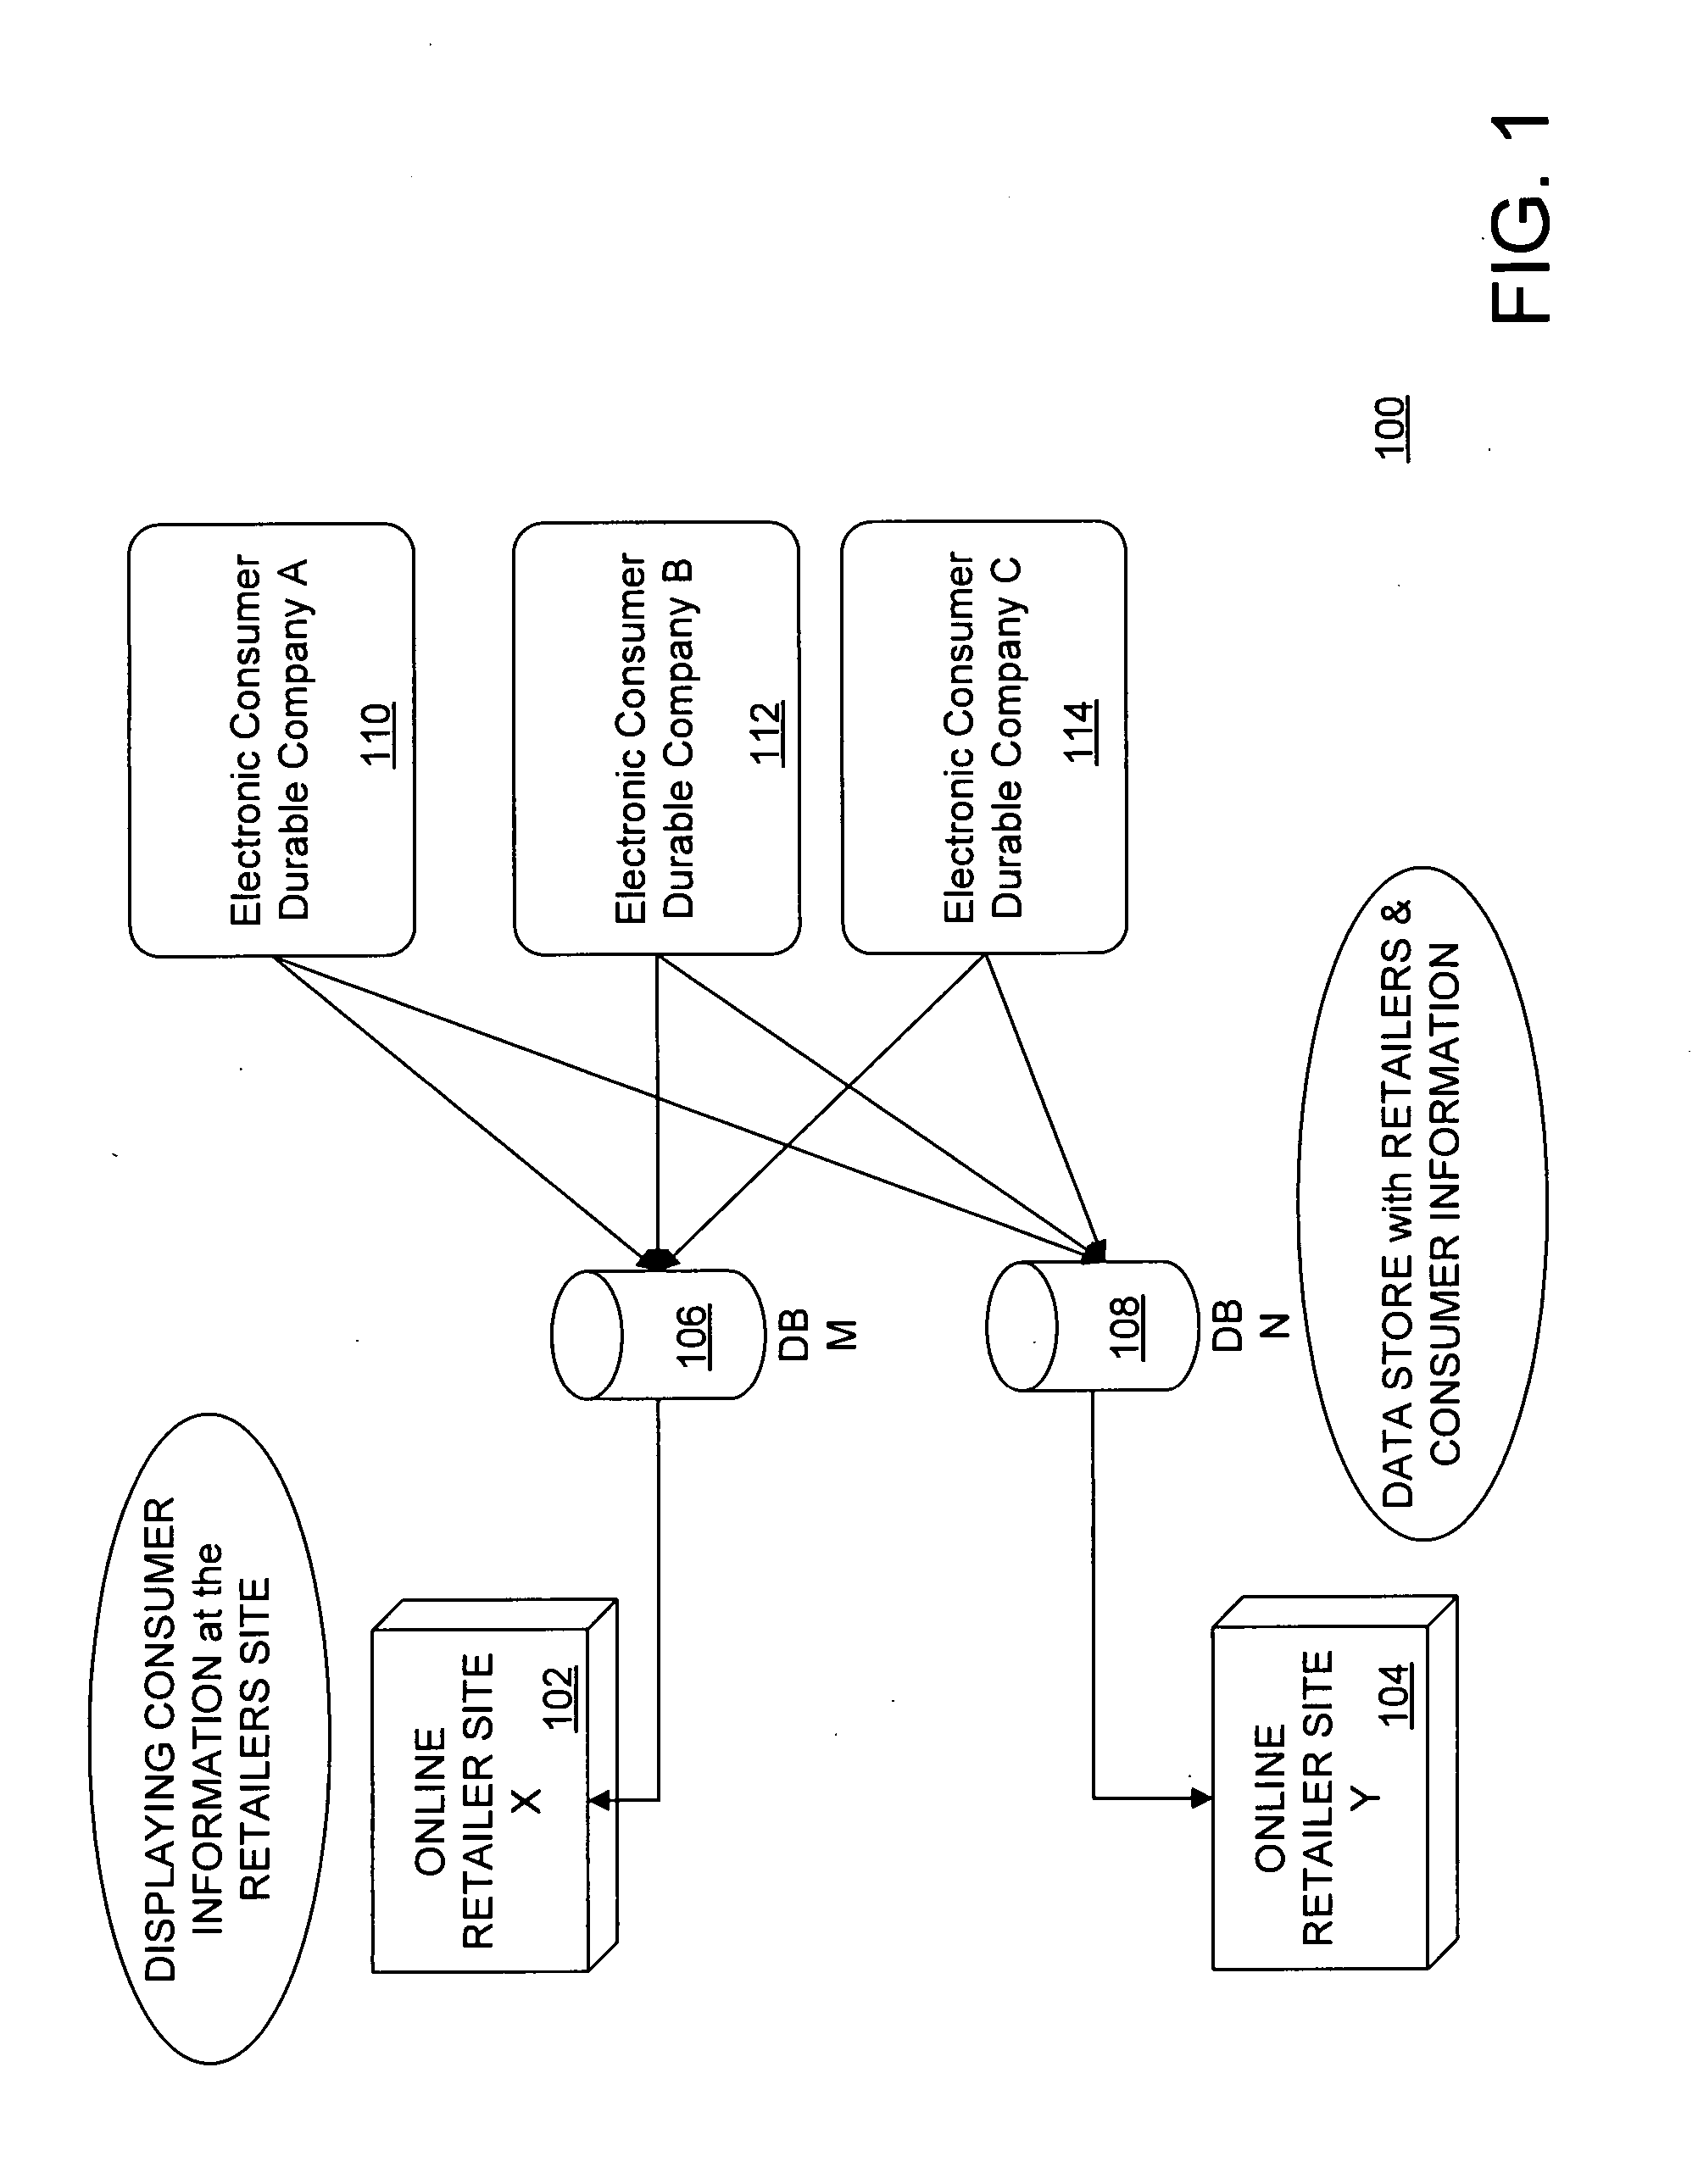 System and method for dynamic creation and customization of user interface in a web service environment